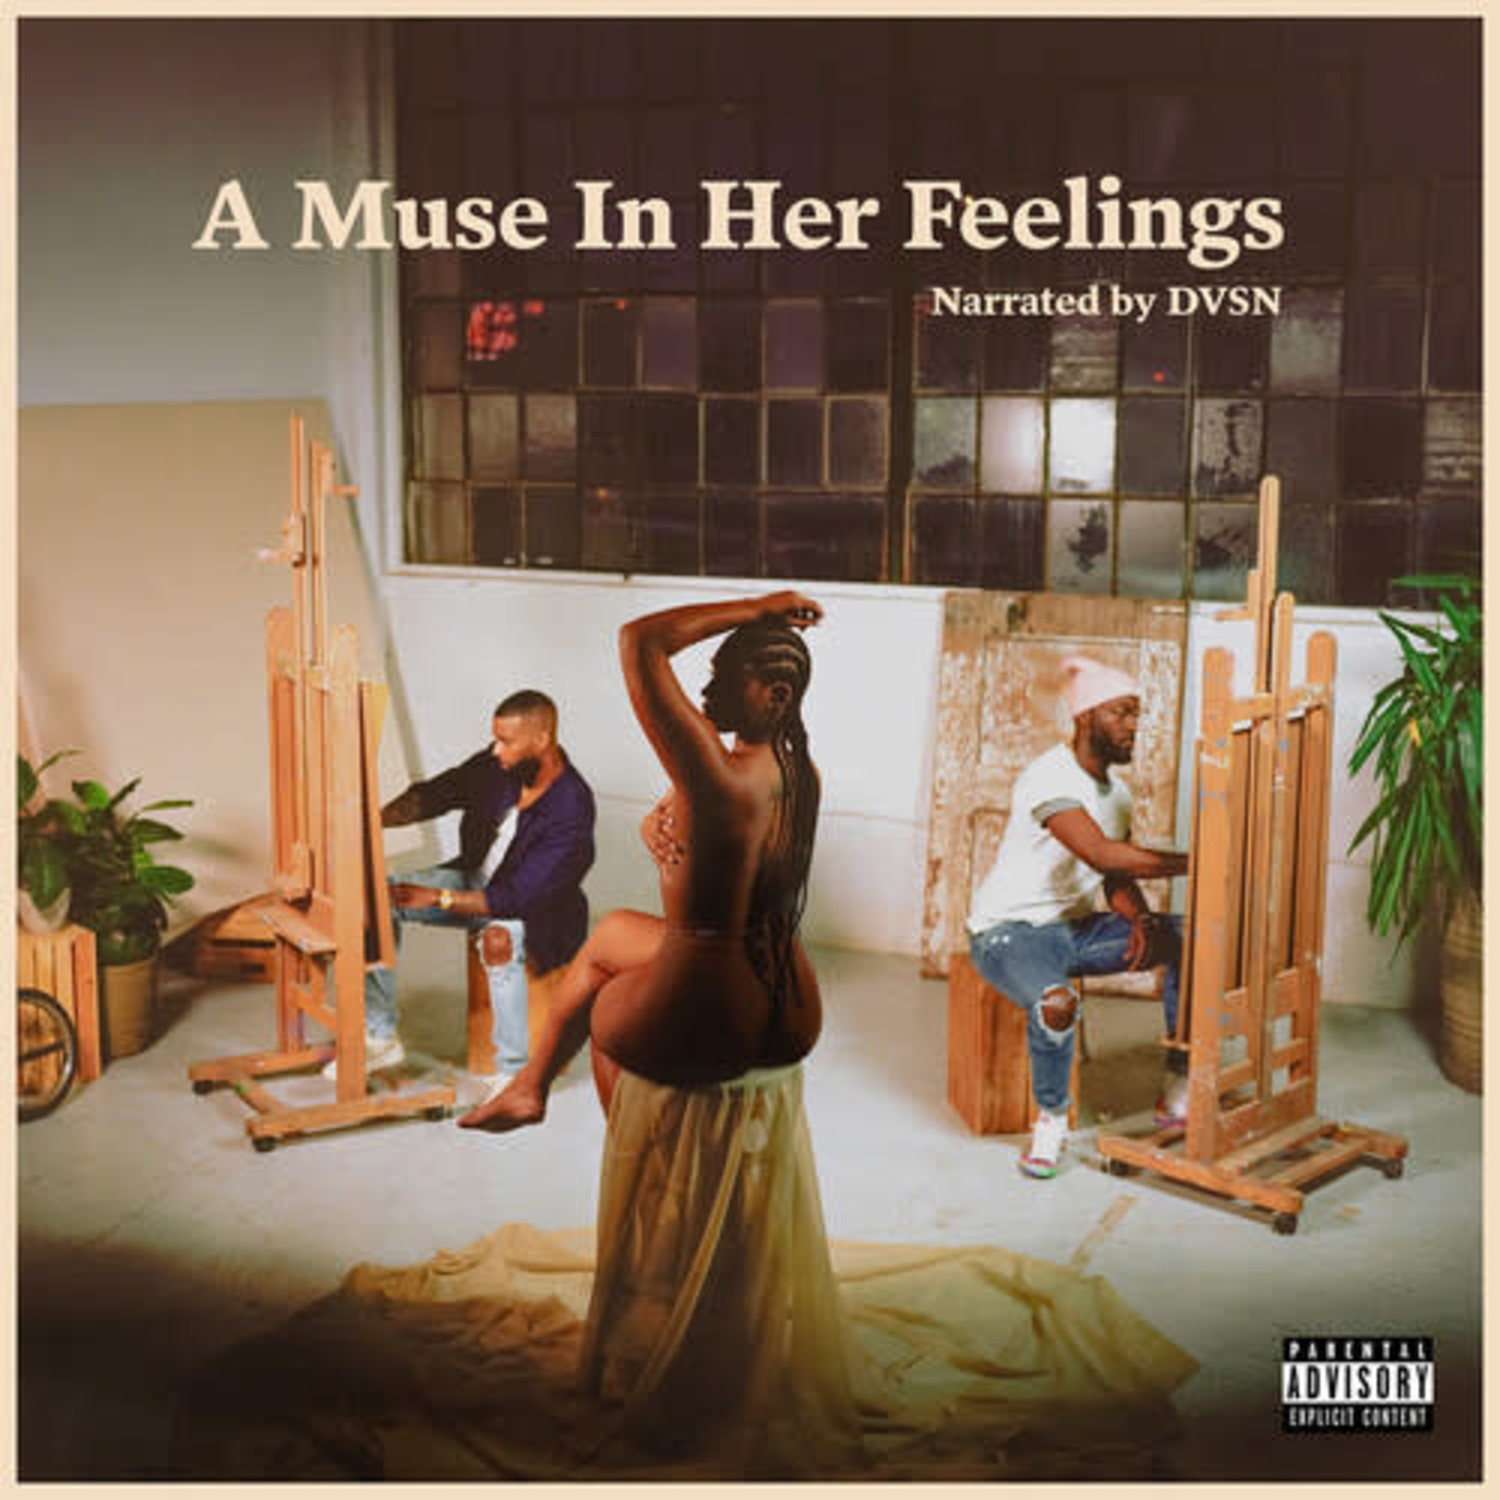 DVSN - A Muse in Her Feelings LP - Wax Trax Records